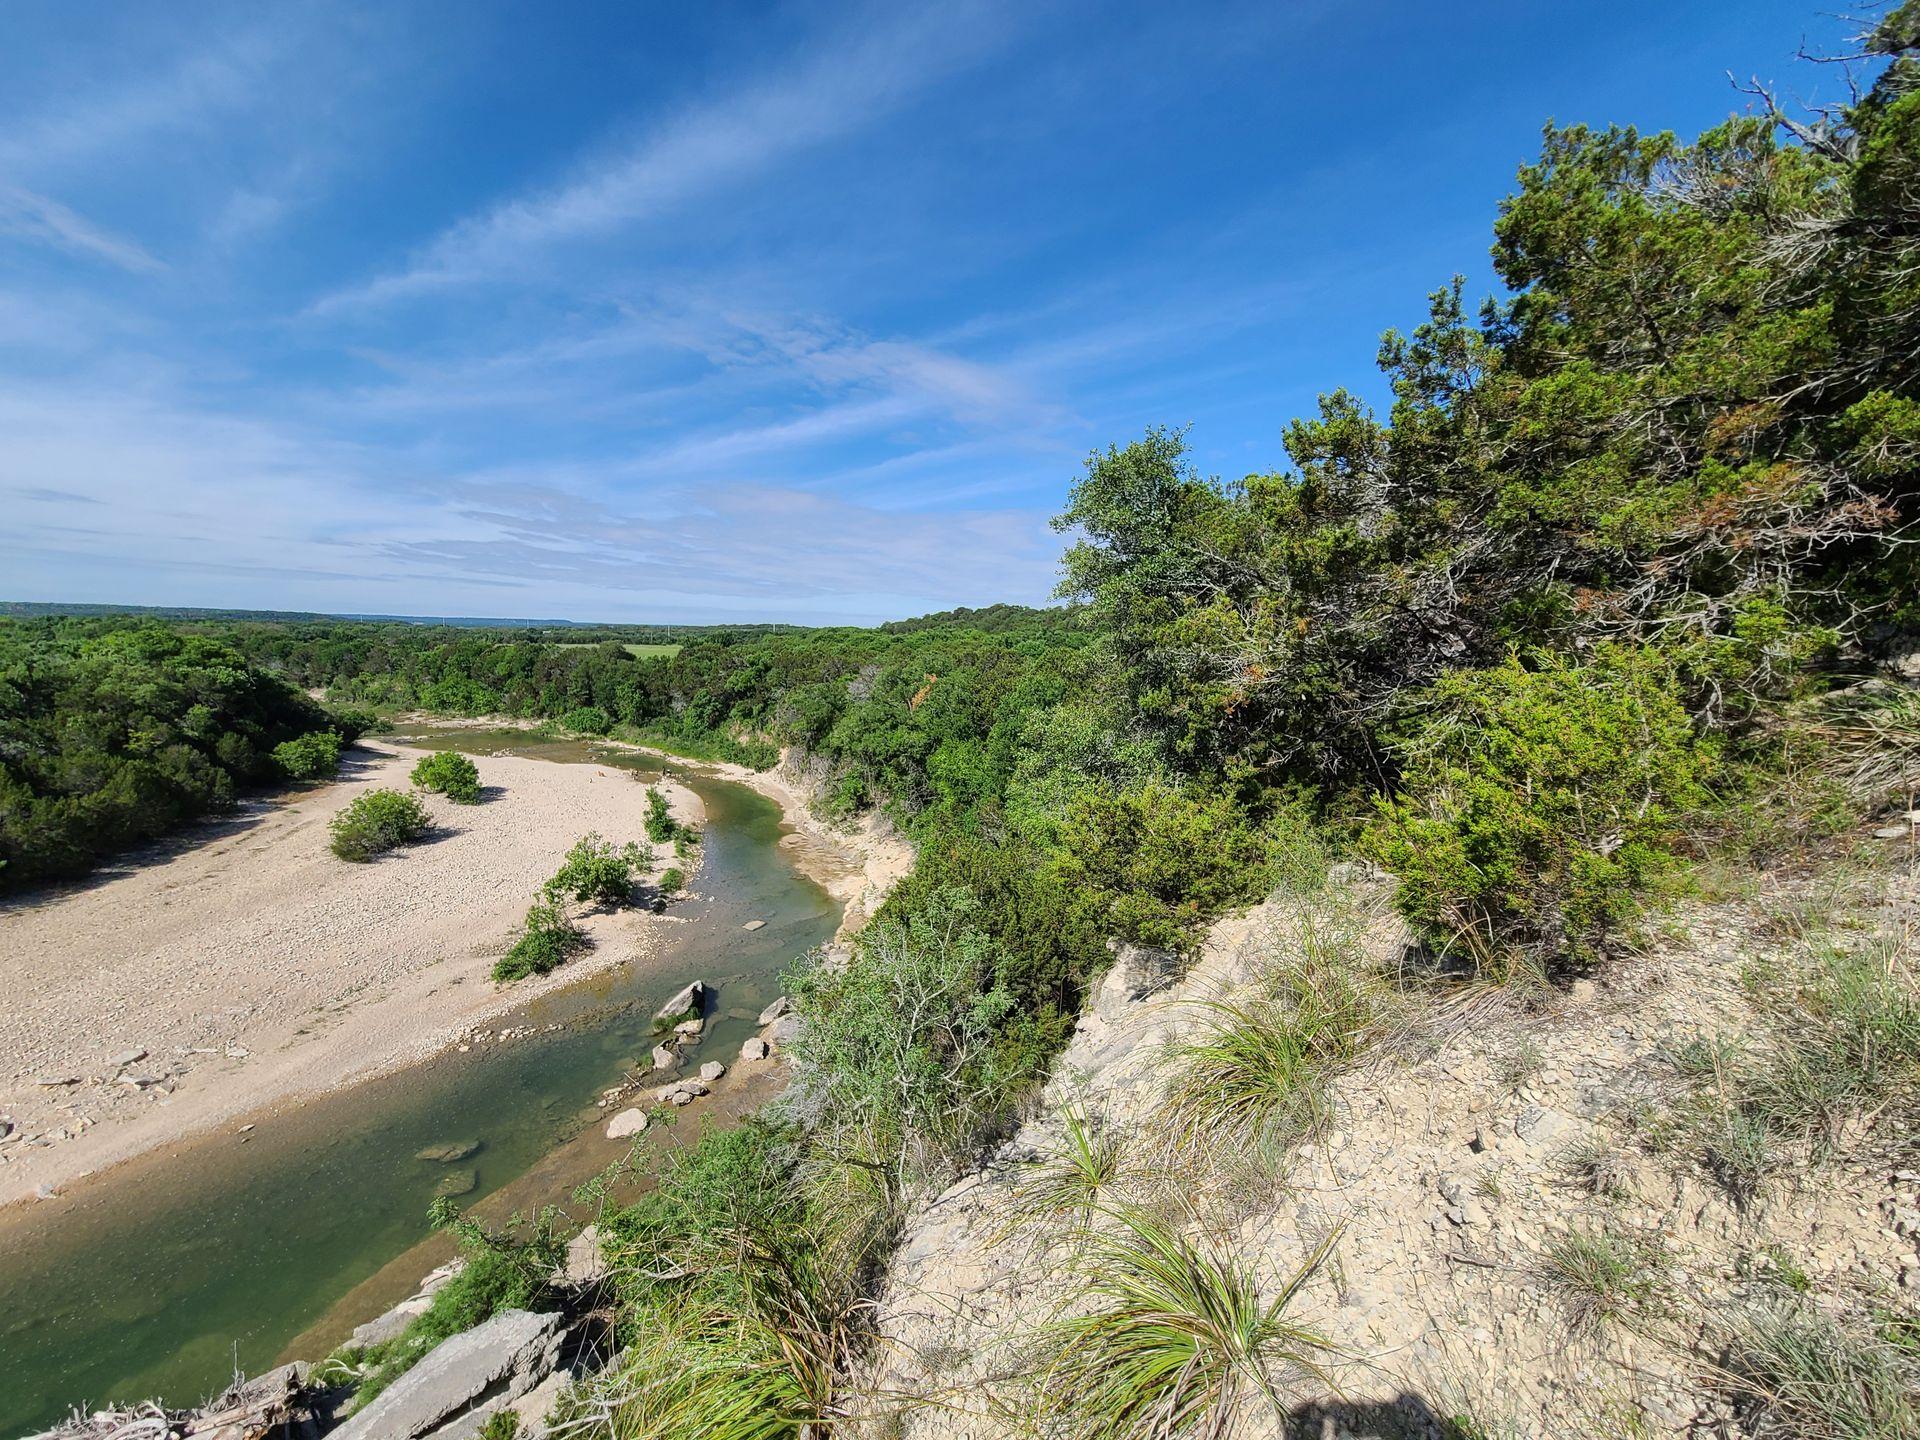 A view of the Paluxy River from an overlook at Dinosaur Valley State Park.